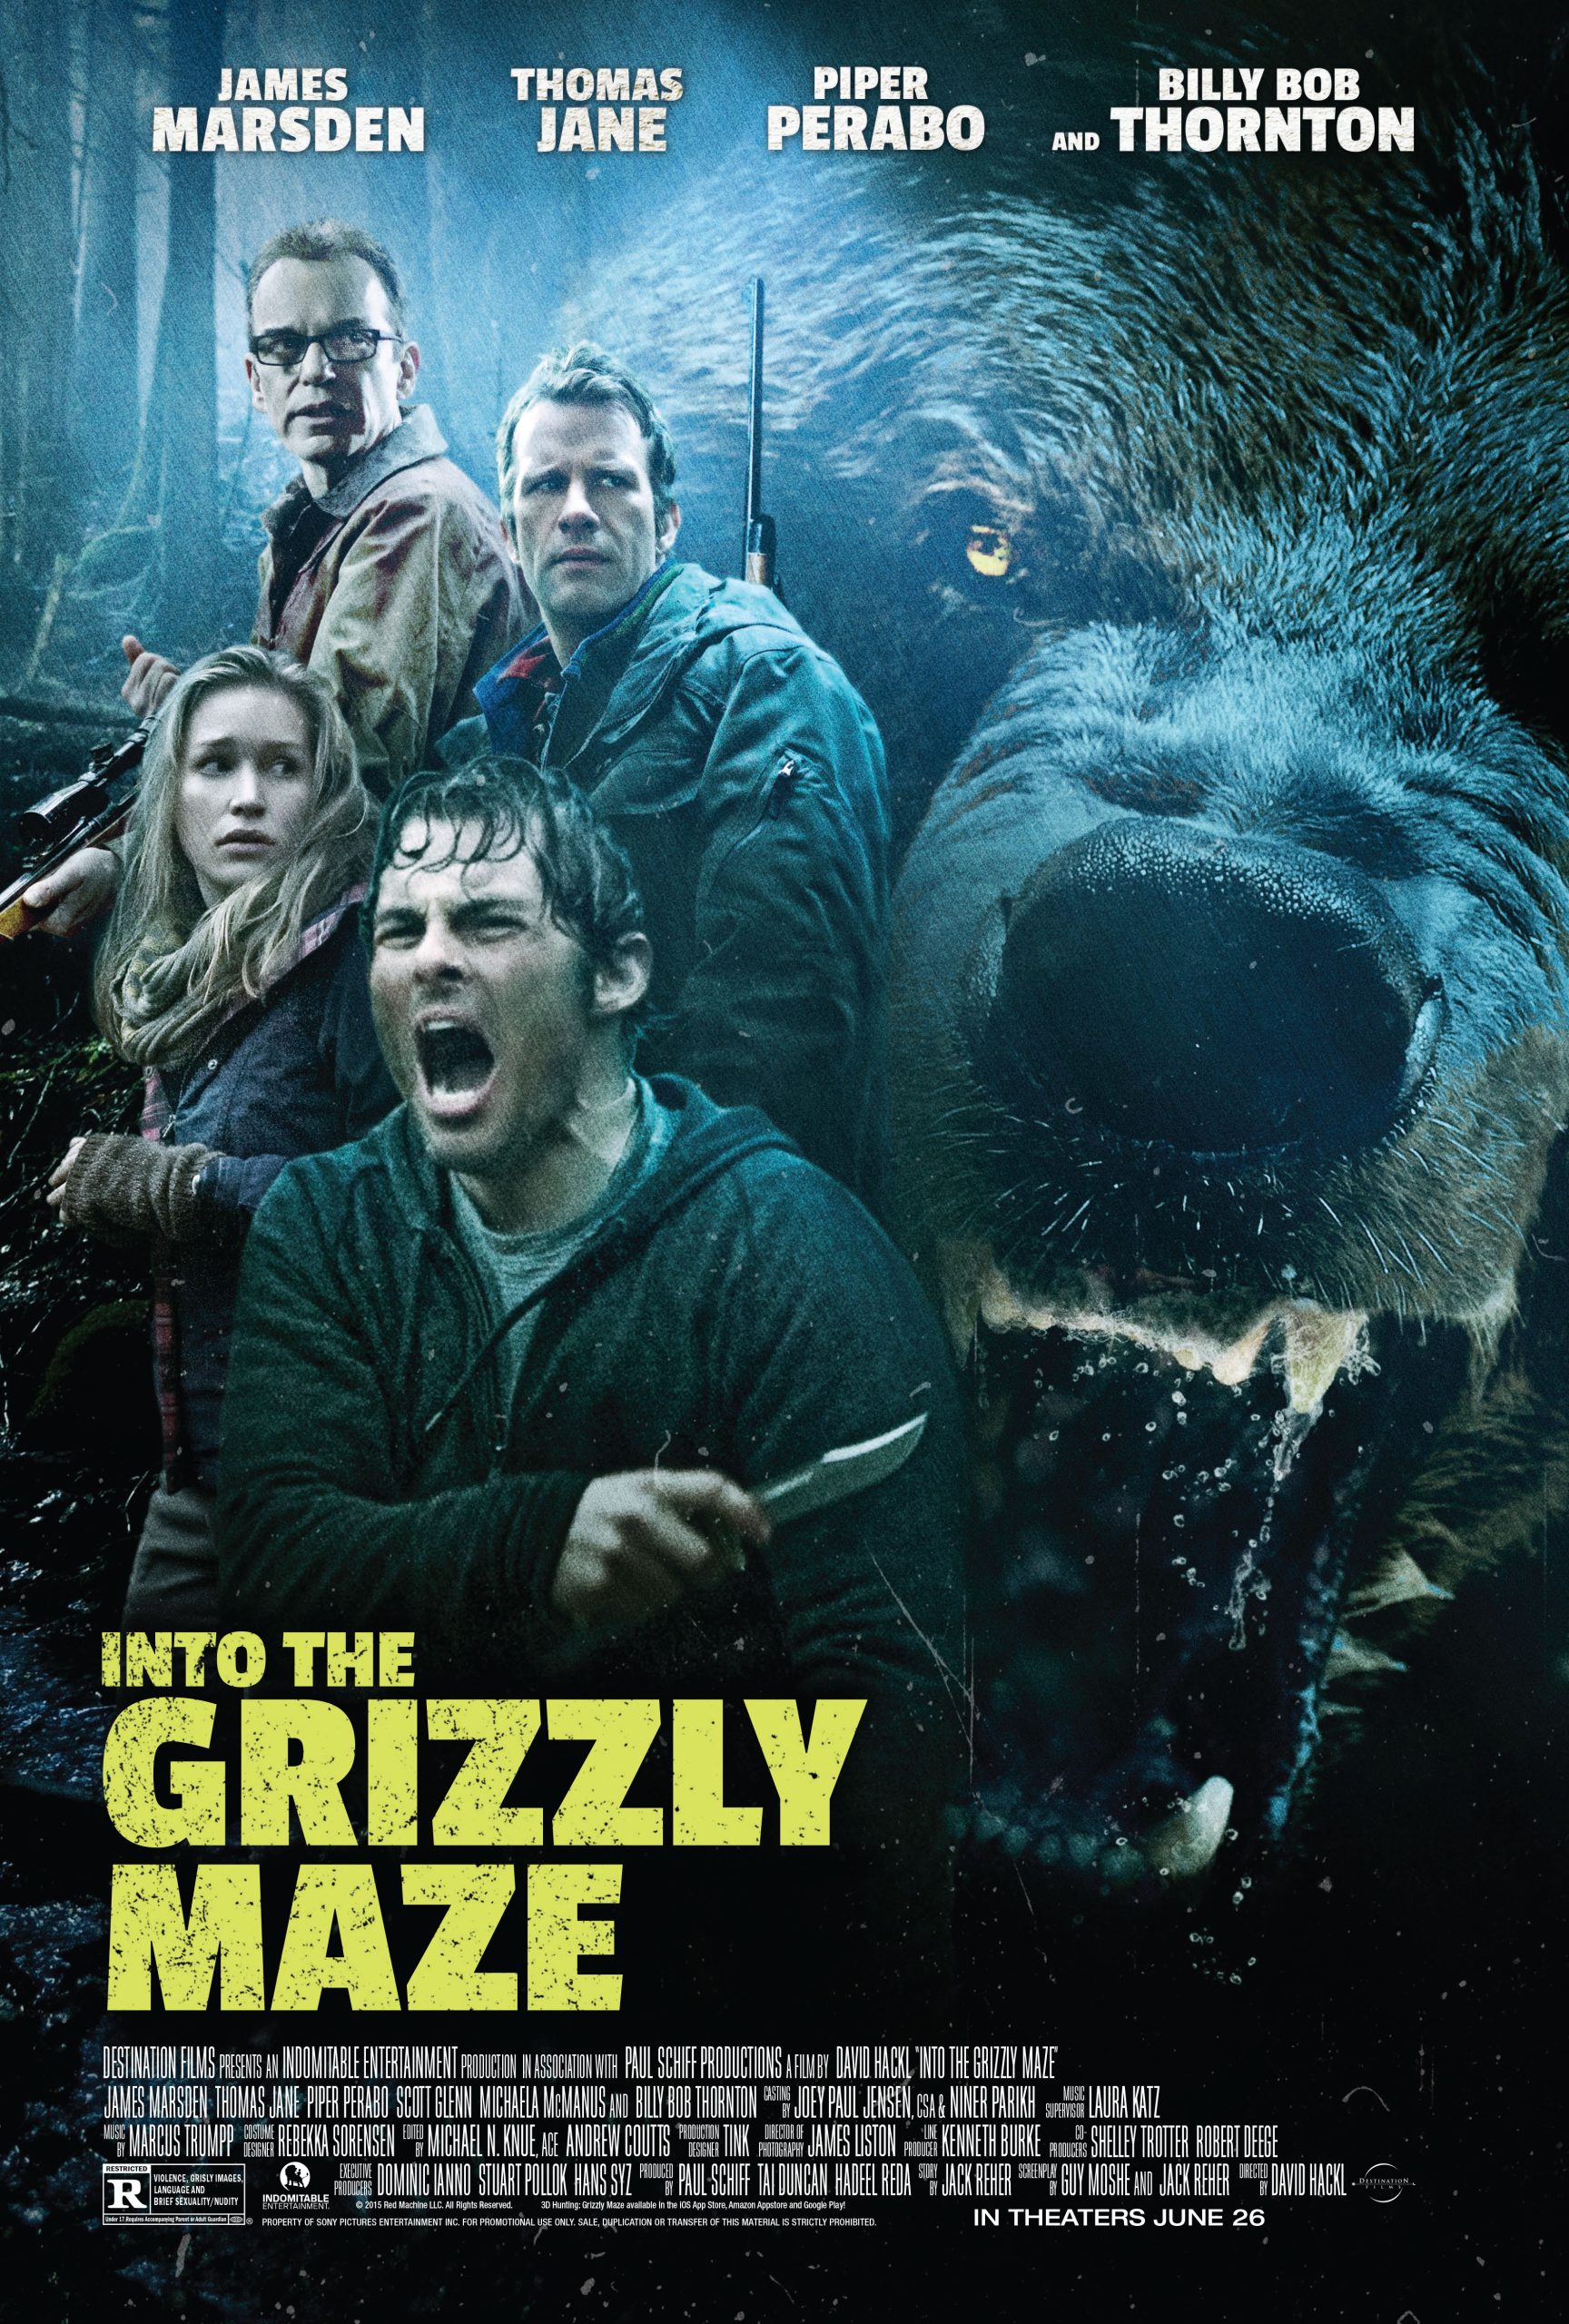 Into the Grizzly Maze (2015) James Marsden